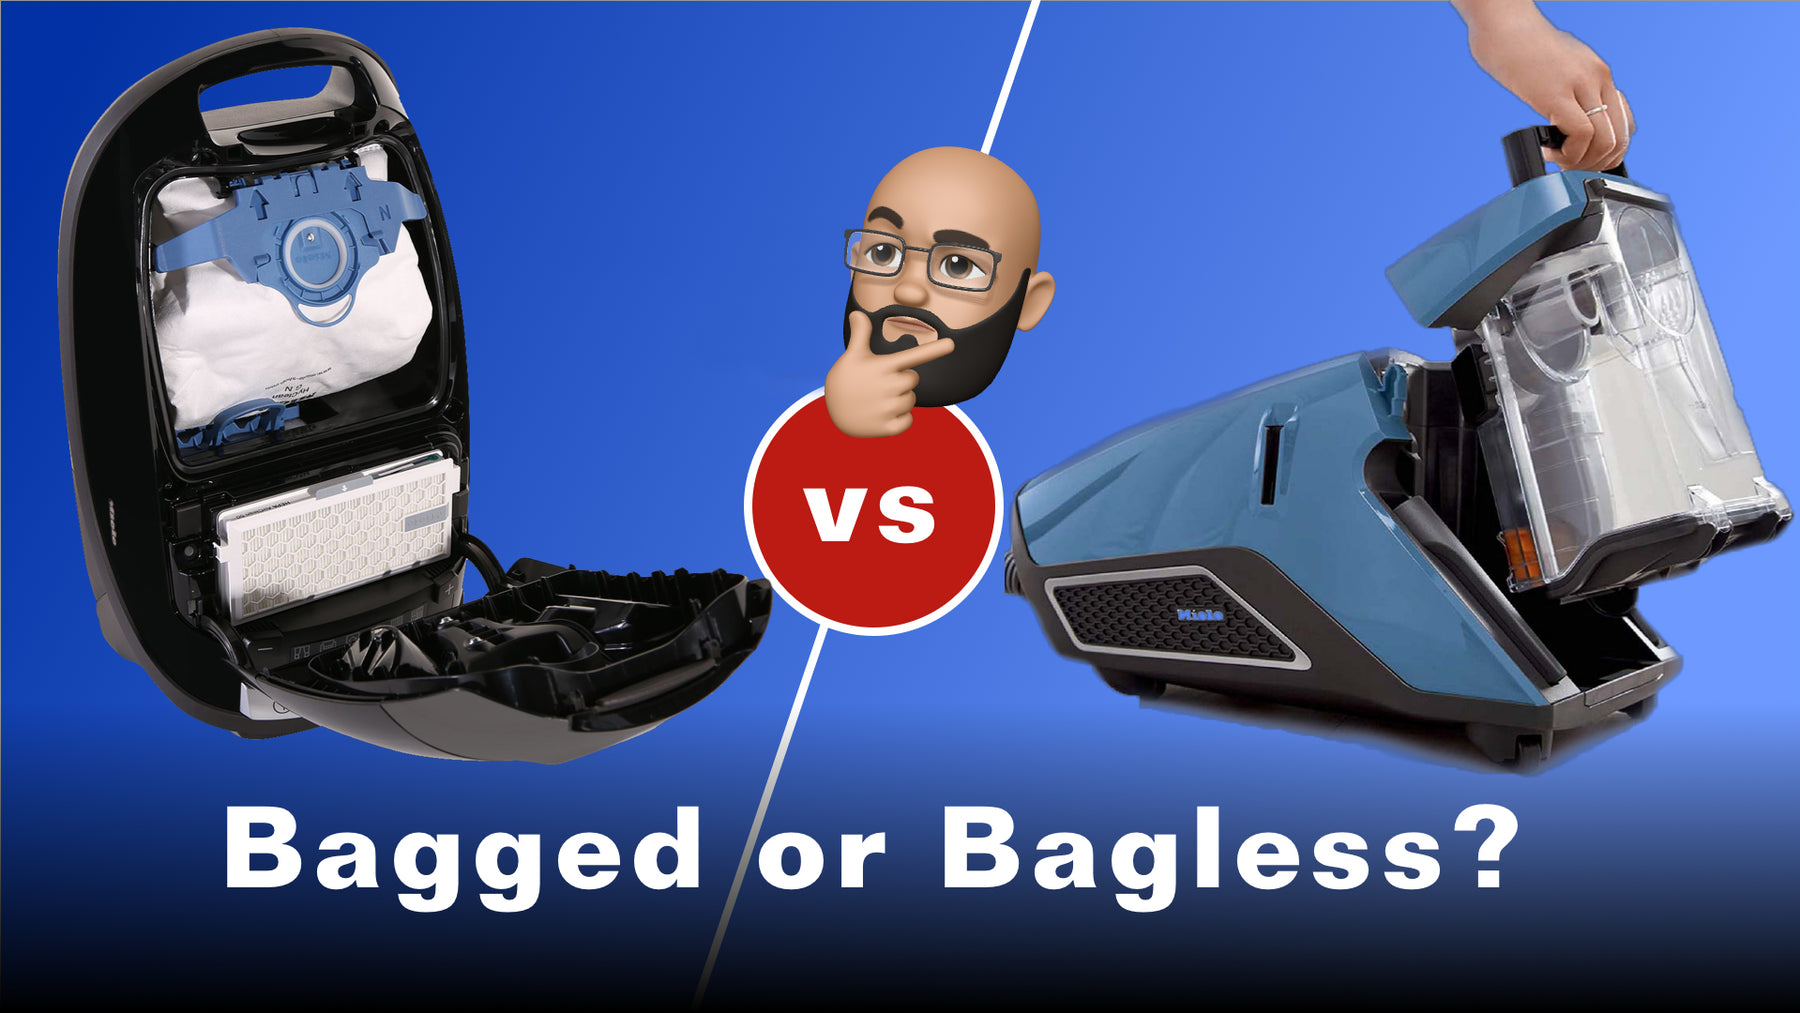 Bagless or Bagged Vacuum: Which is Better?